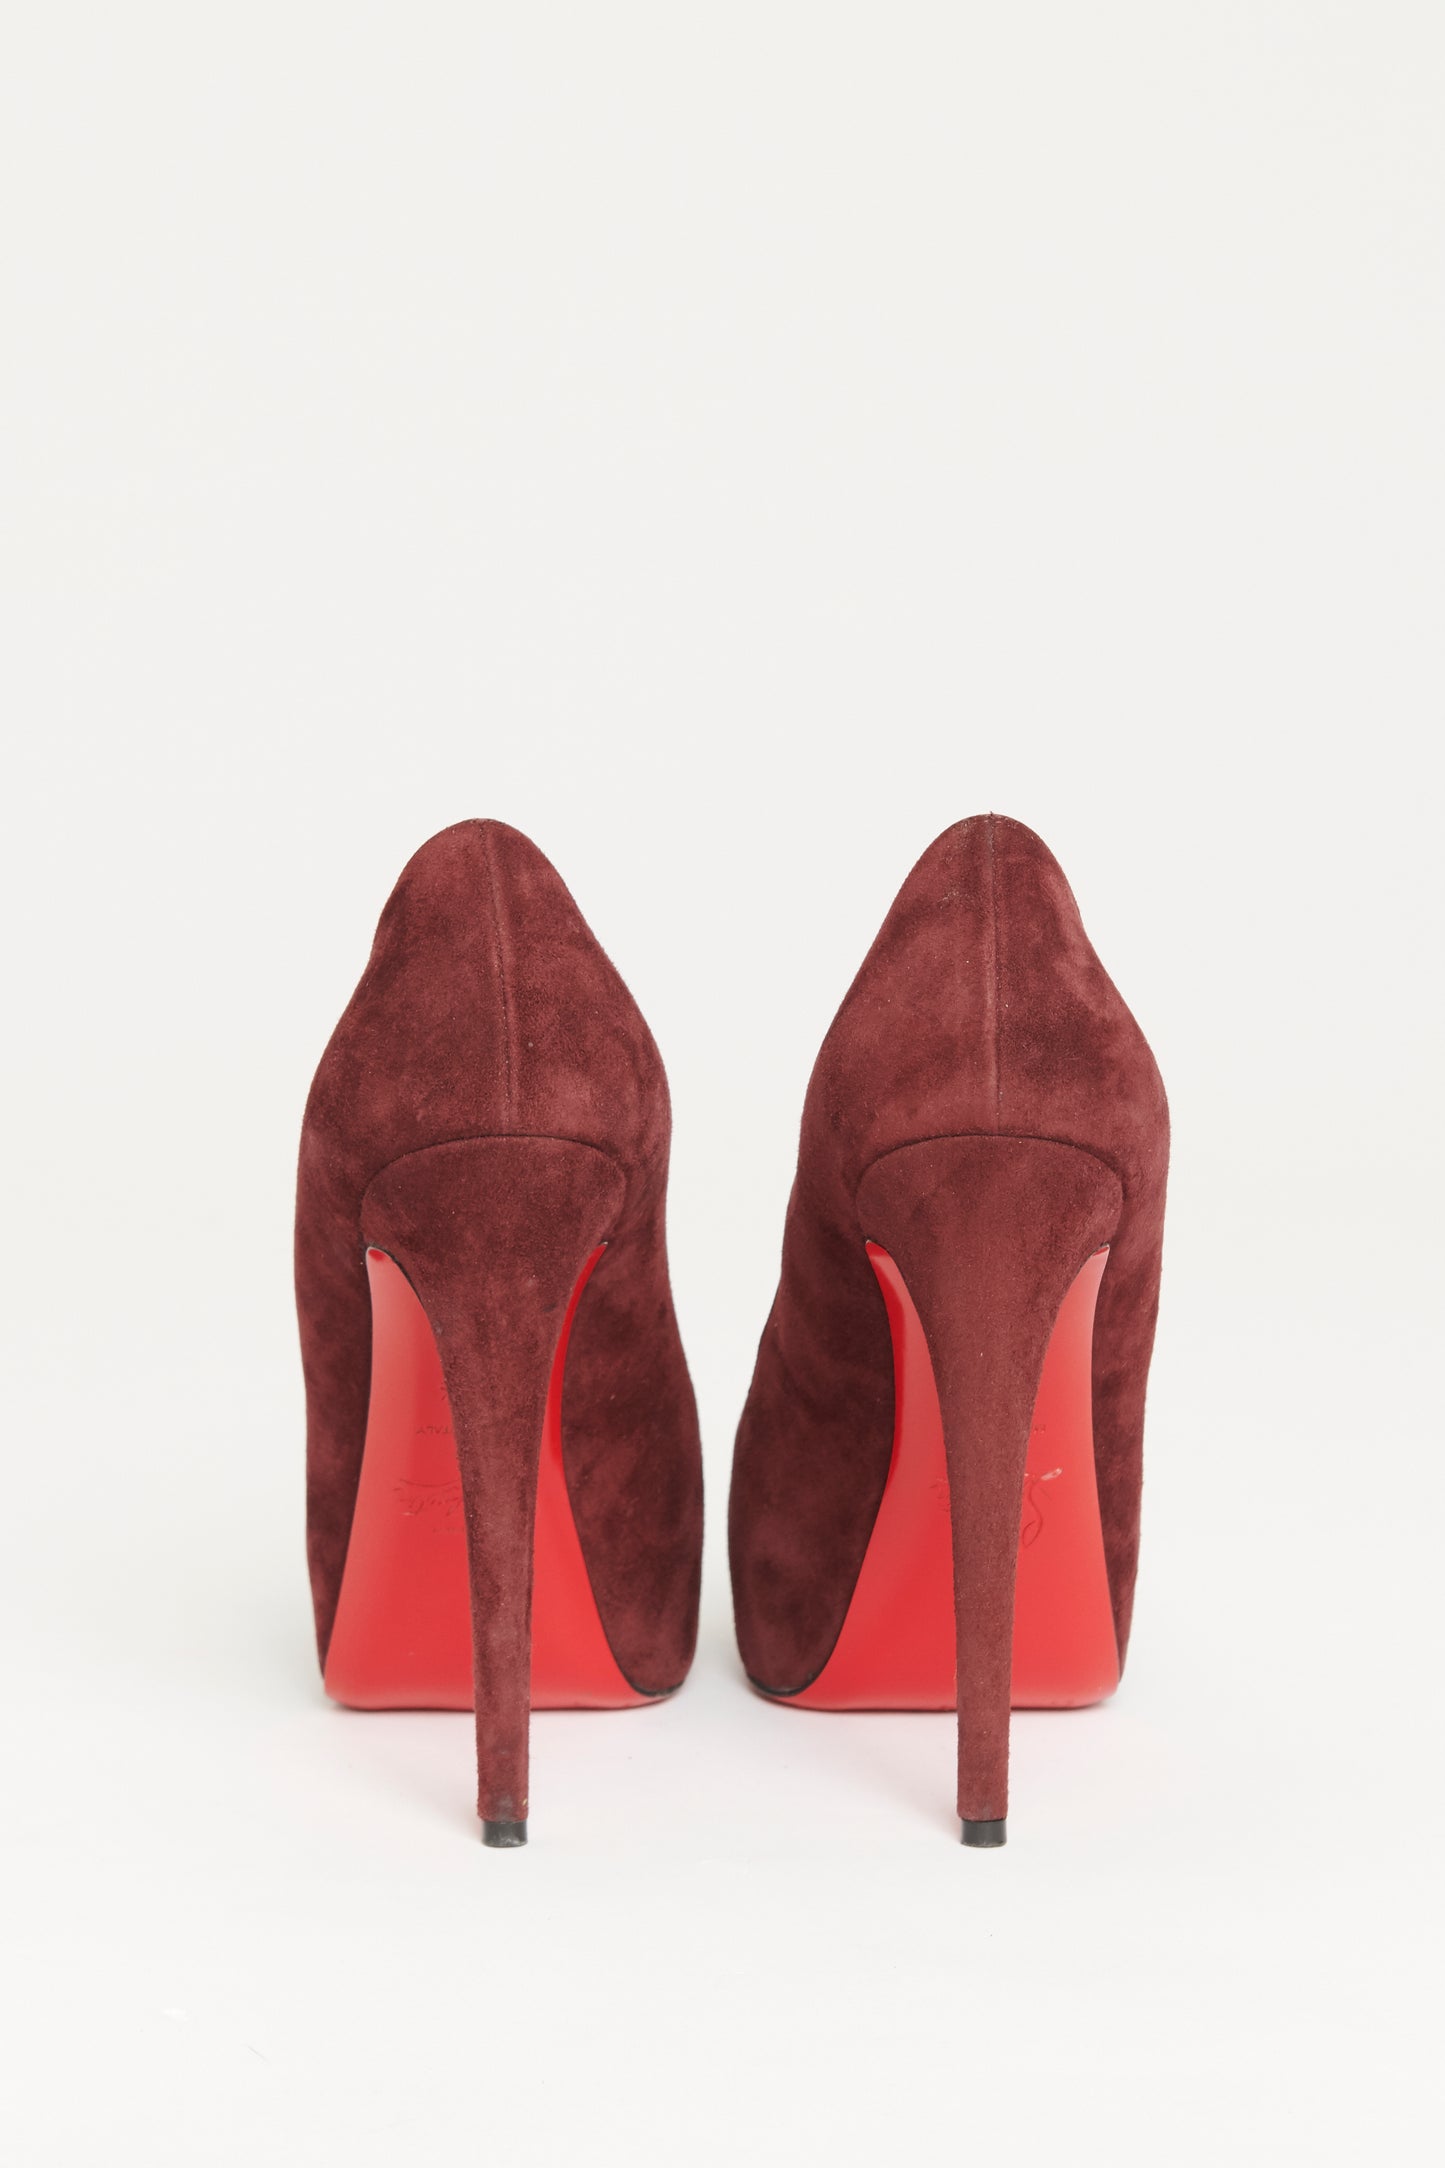 Burgundy Suede Preowned Miss Clichy 140 Pumps